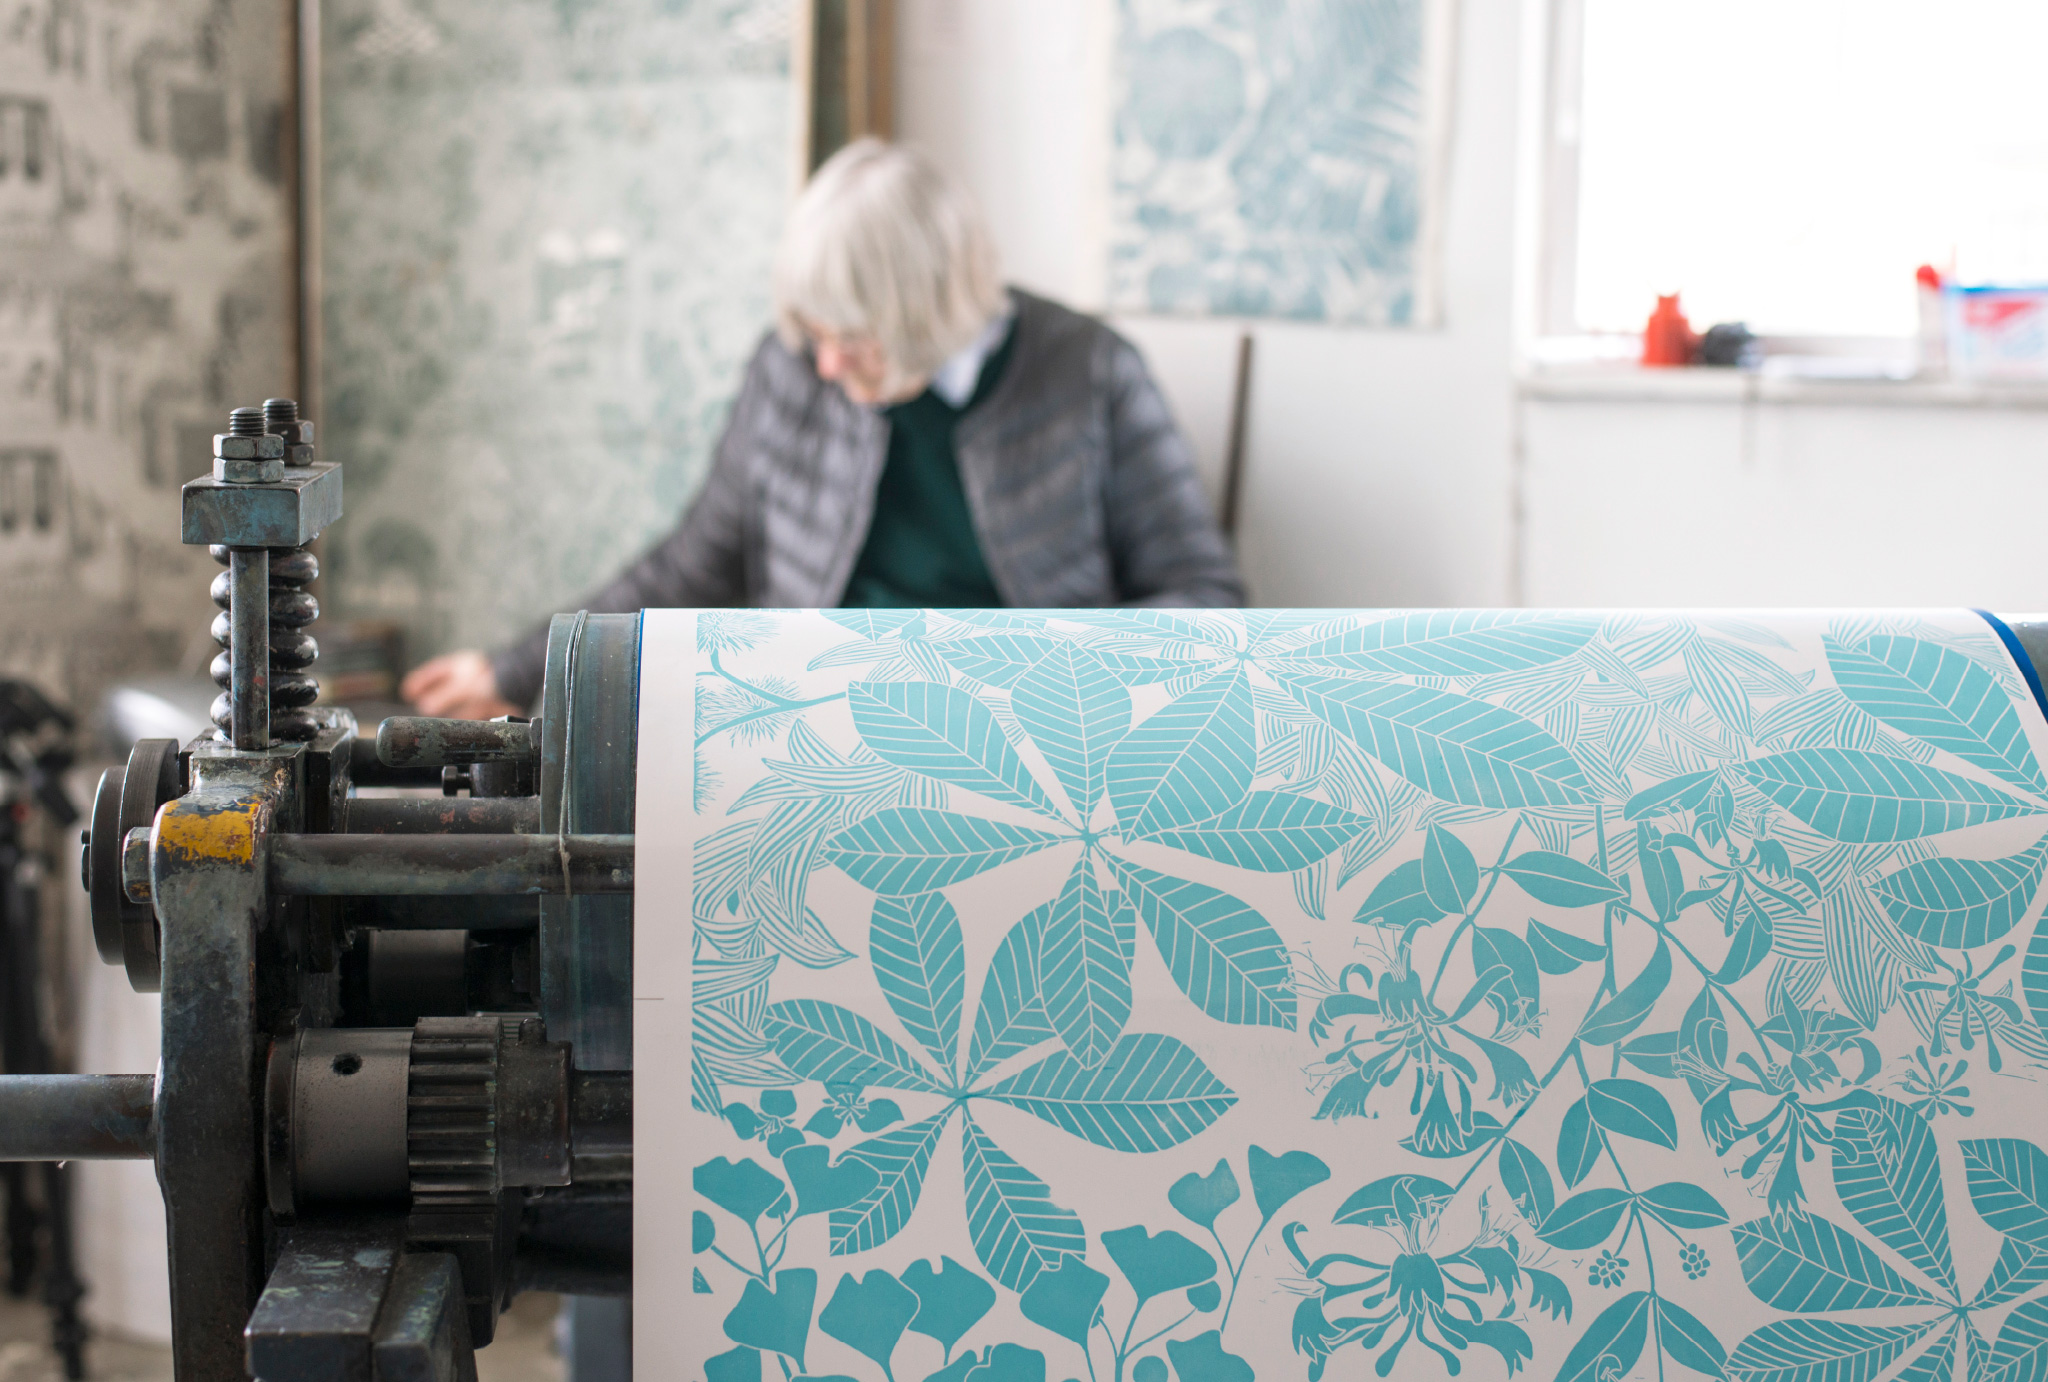 Marthe’s studio with her in the background, some fabric designs on the wall and a hand printed design in the front